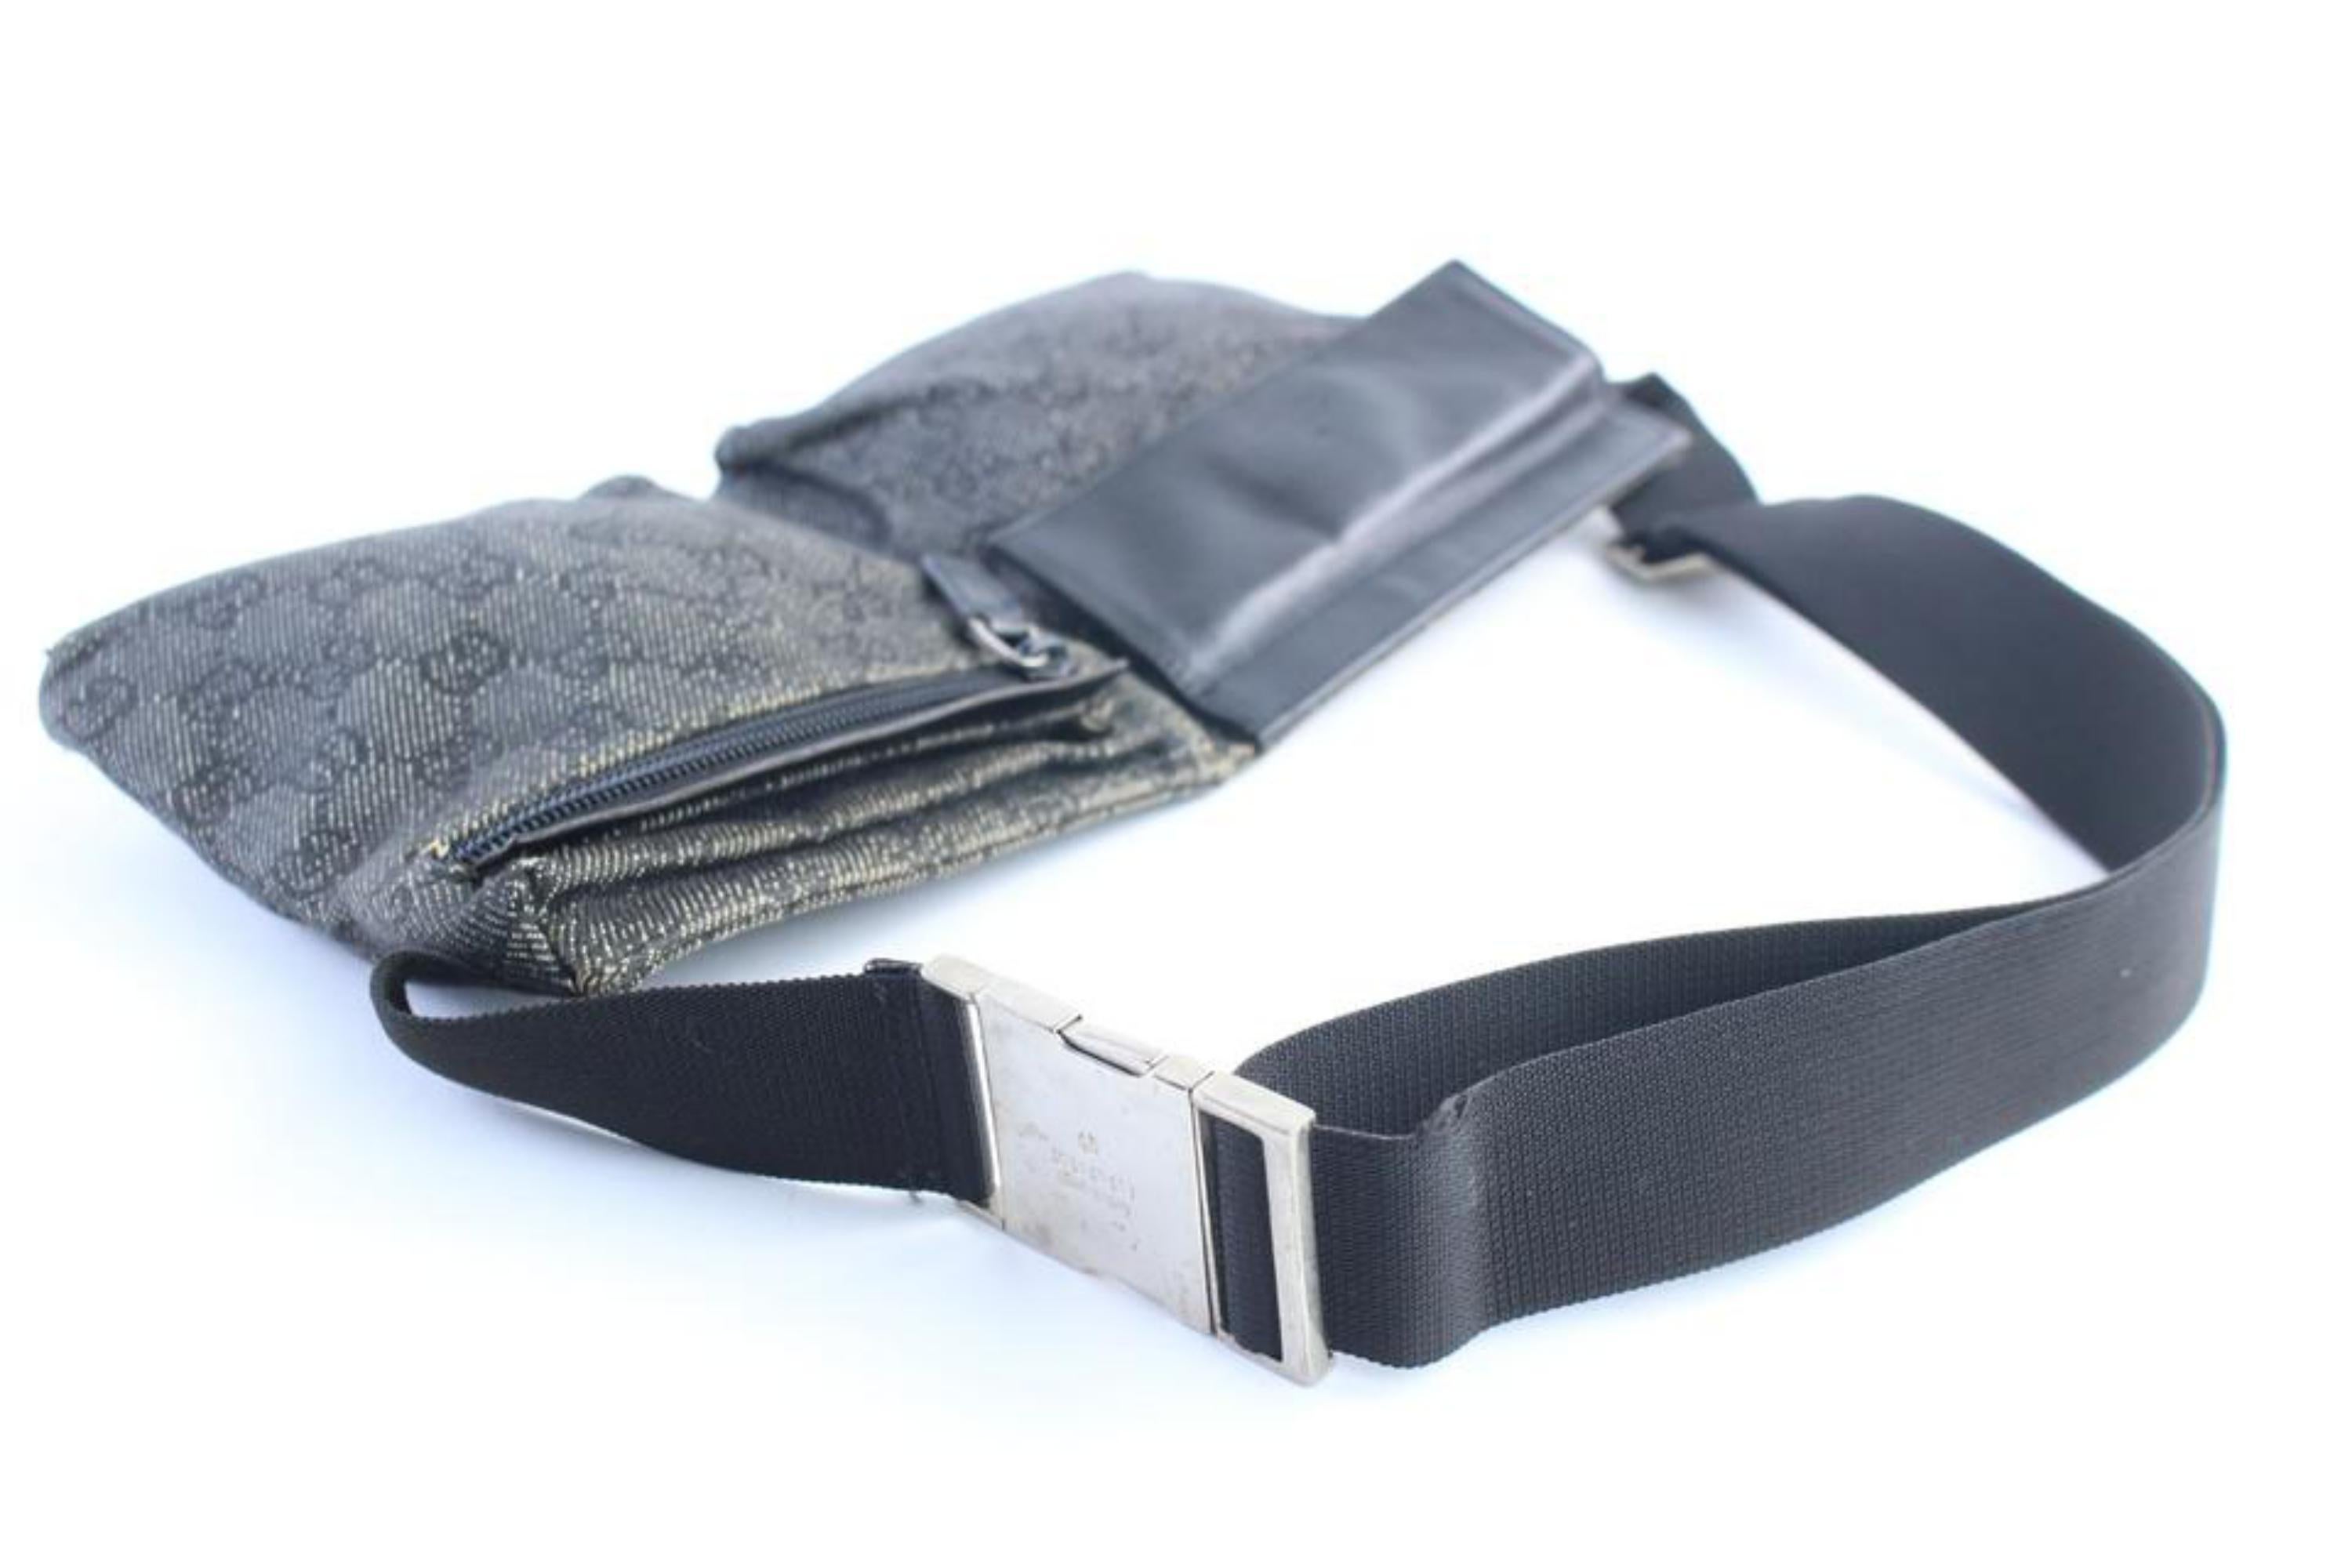 Gucci Gg Denim Fanny Pack Waist Pouch 228533 Charcoal Coated Canvas Travel Bag In Good Condition For Sale In Forest Hills, NY